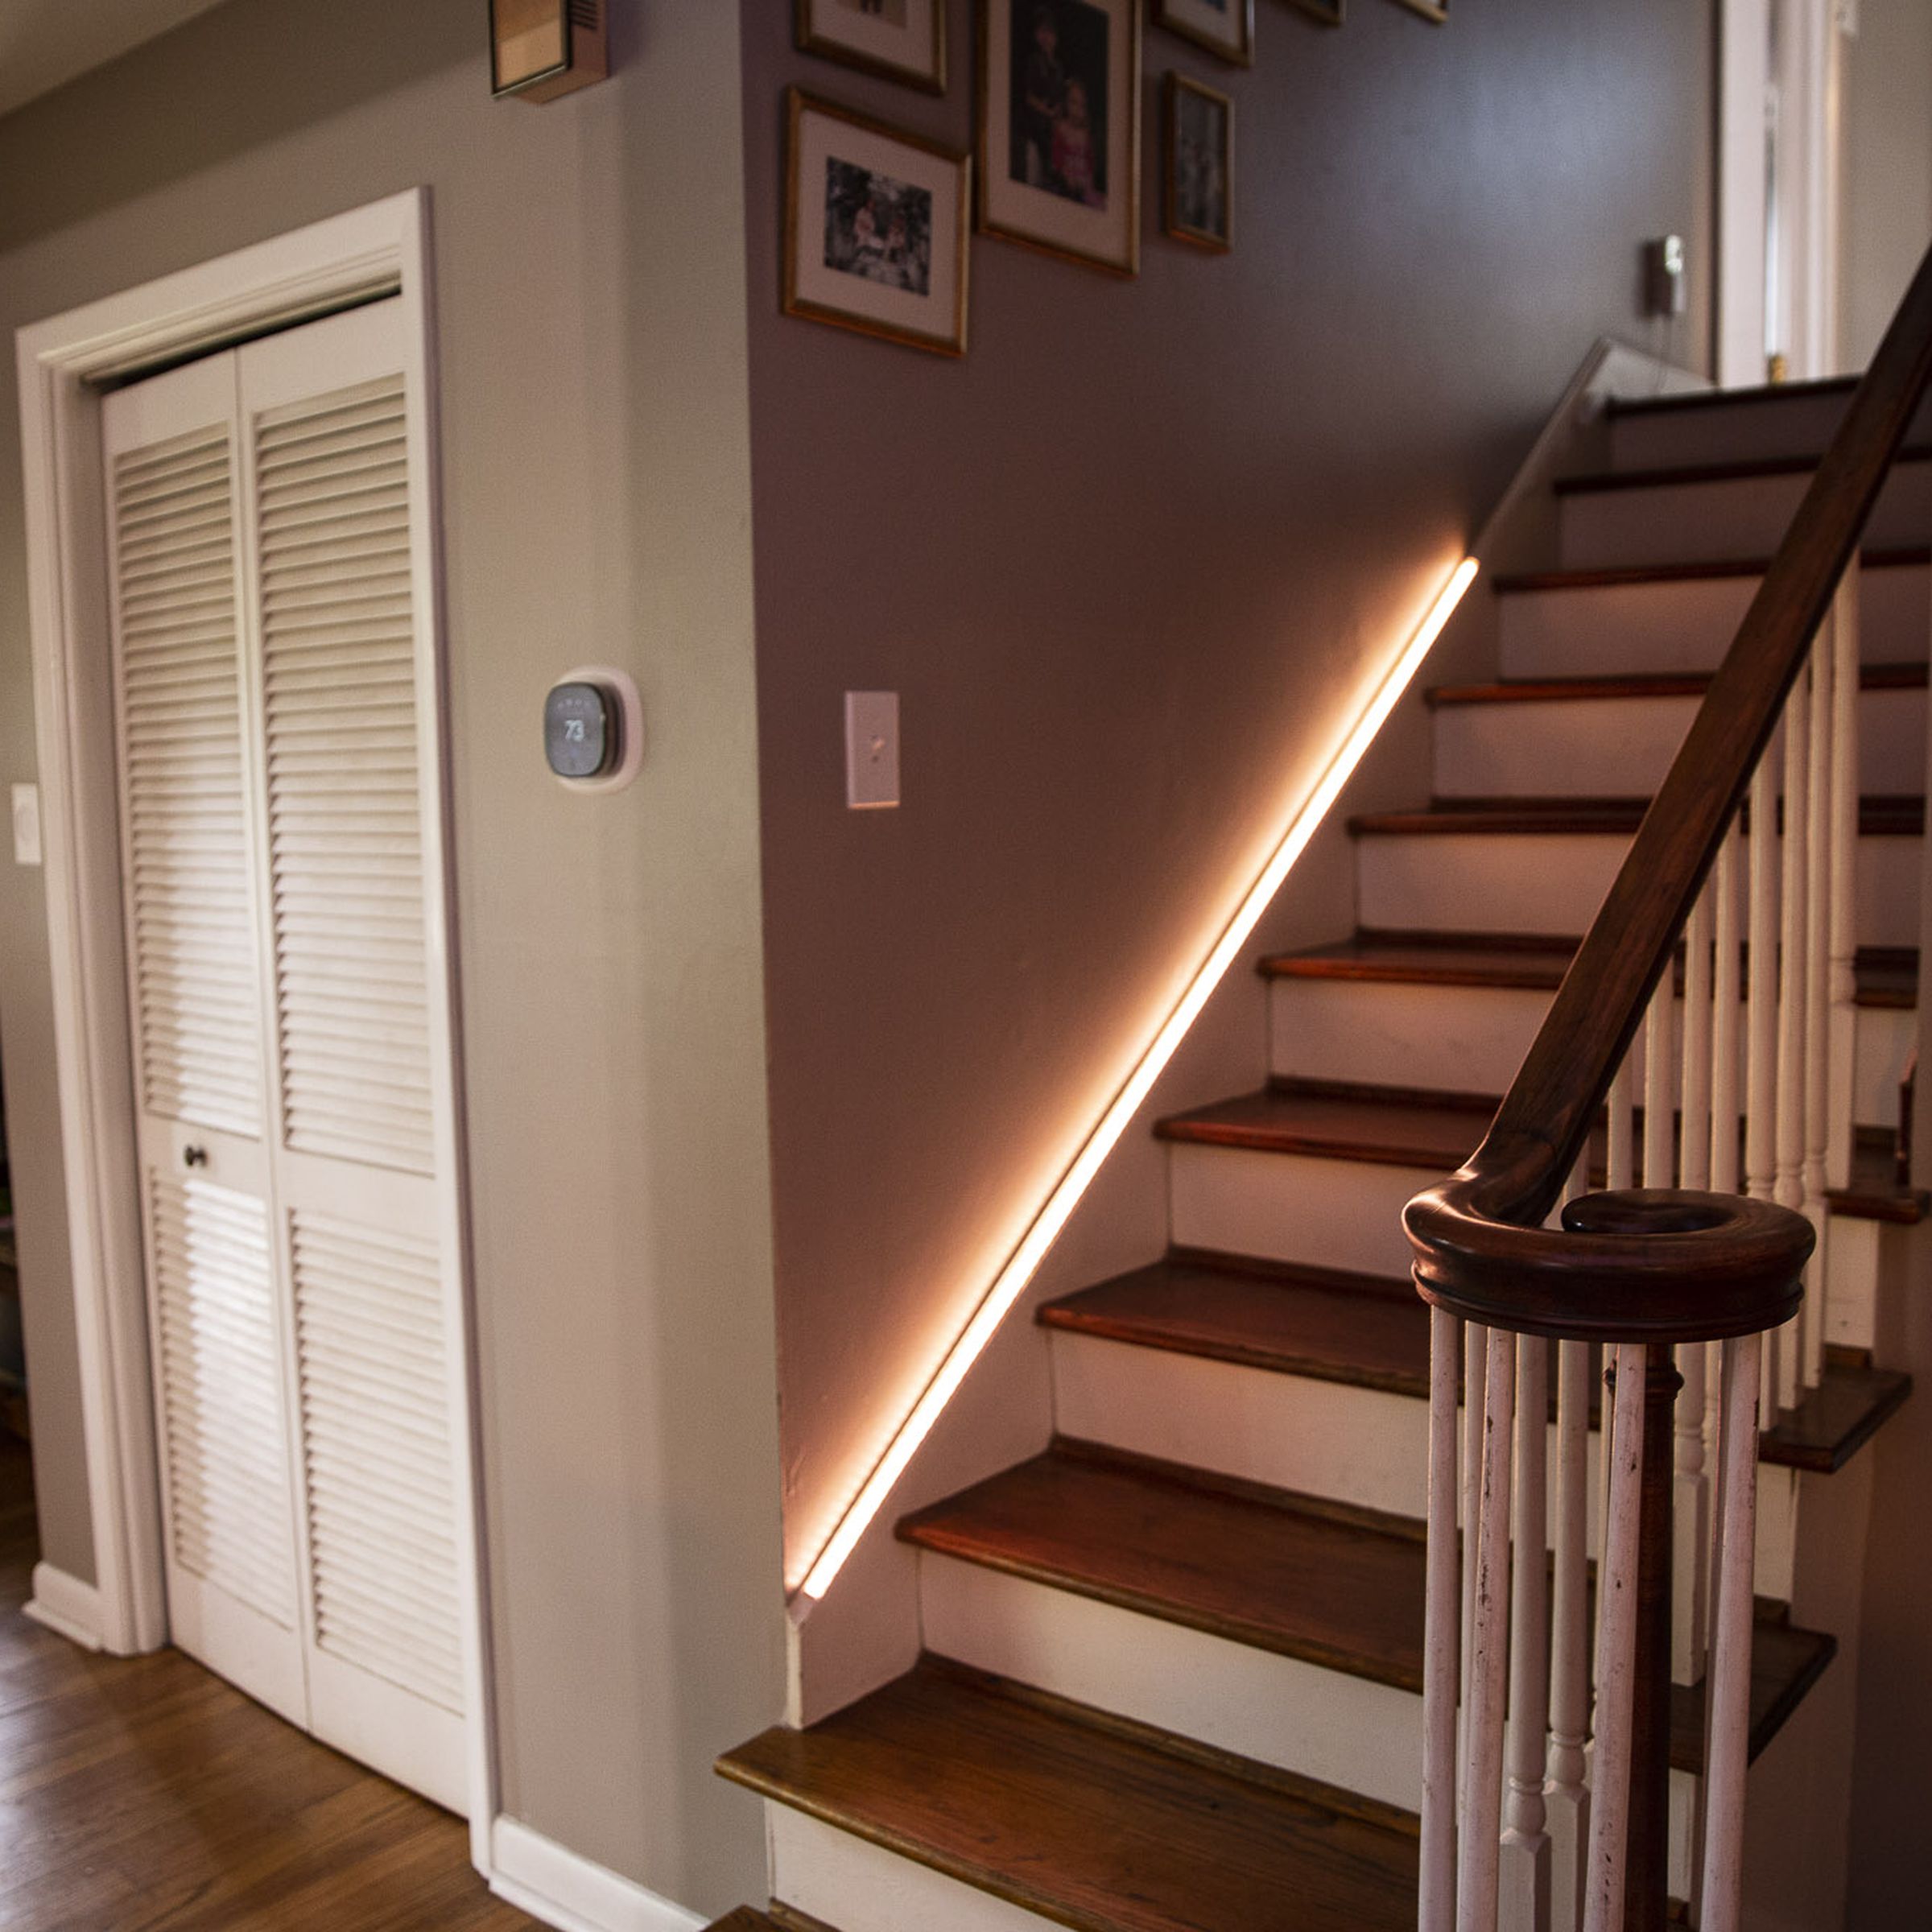 Govee’s LED Strip Light M1 Matter hanging on a staircase railing while raiding white light.